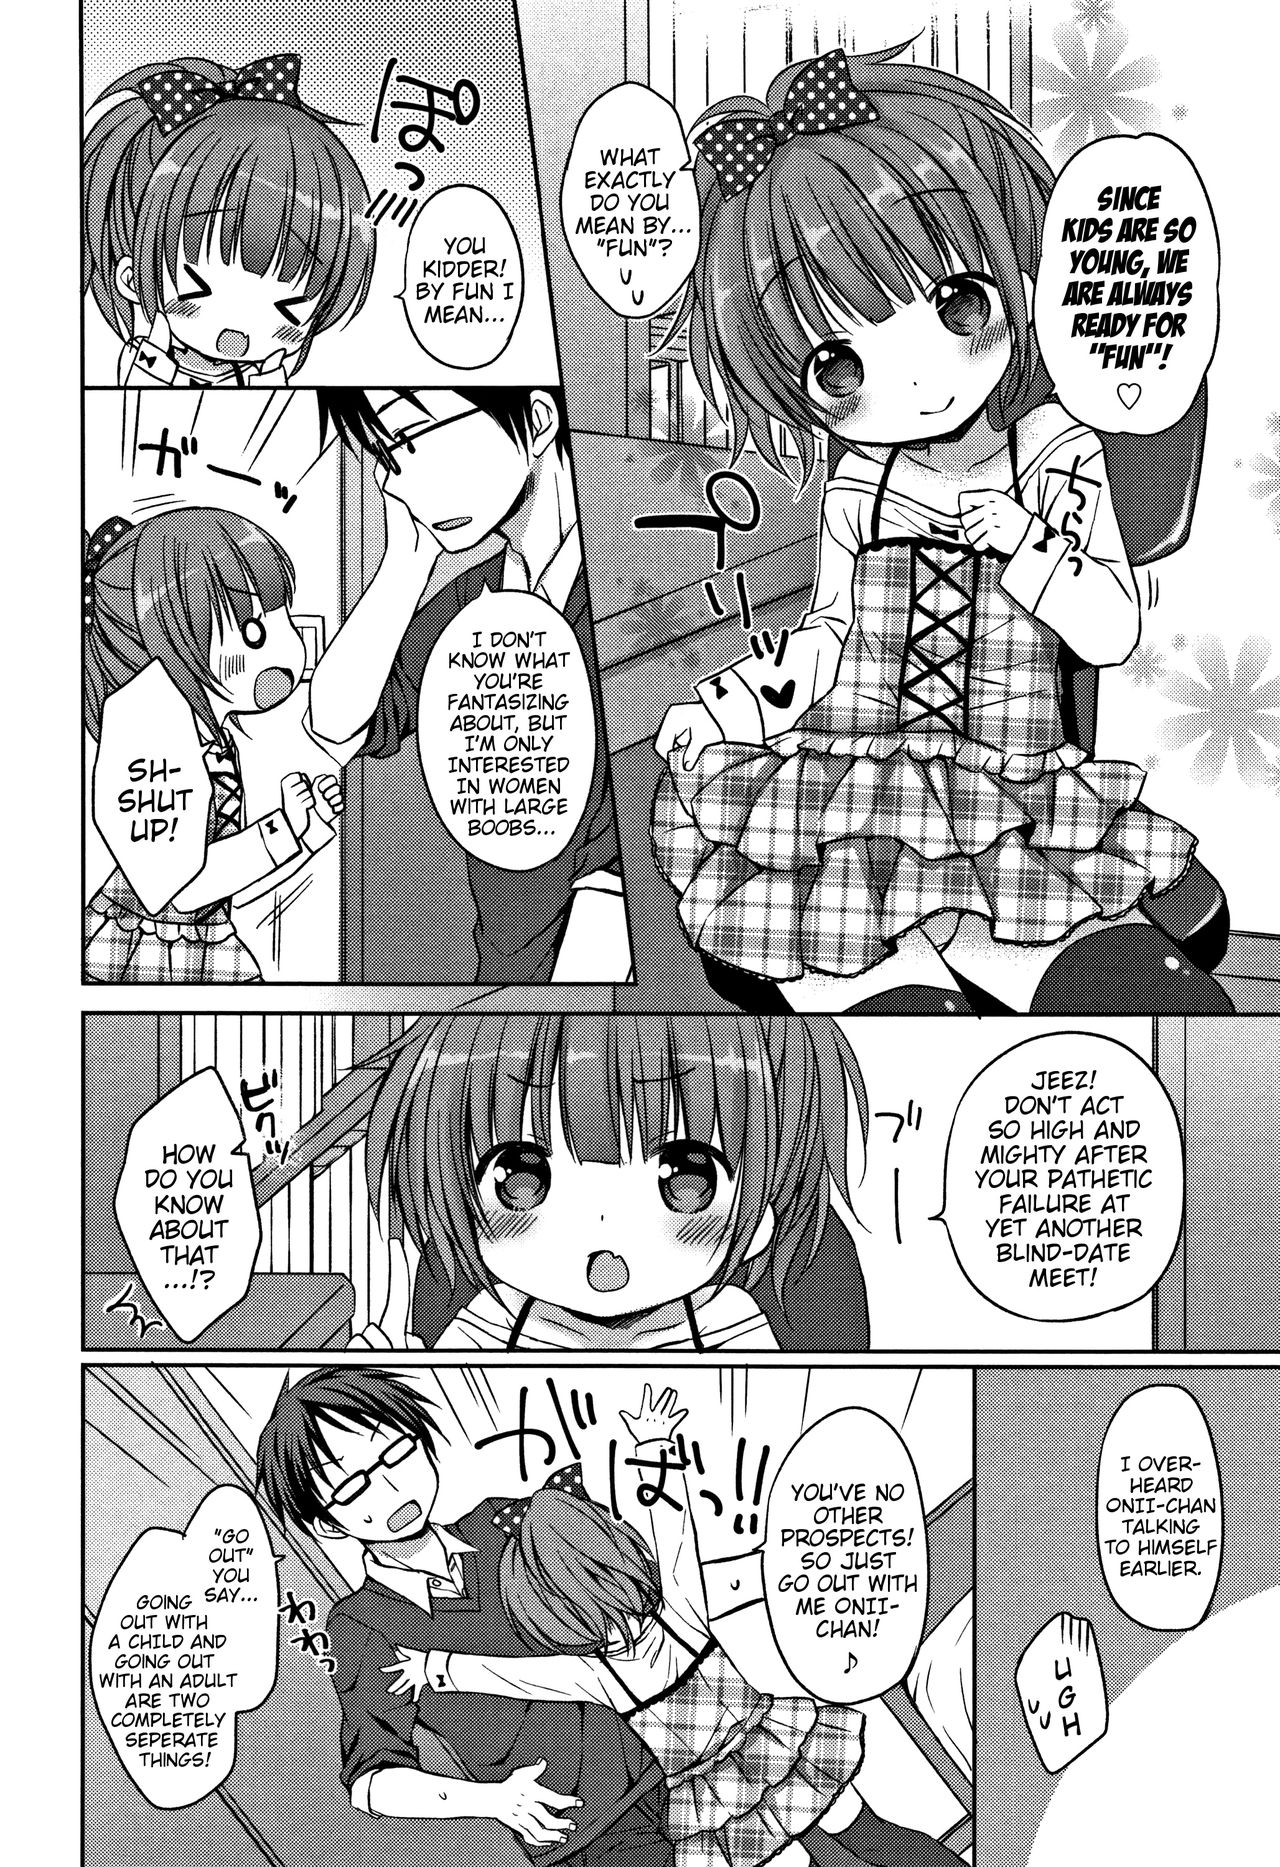 [Rico] Onii-chan Asobo | Let's Play Onii-chan Ch.1-8 [English] {Mistvern} page 25 full